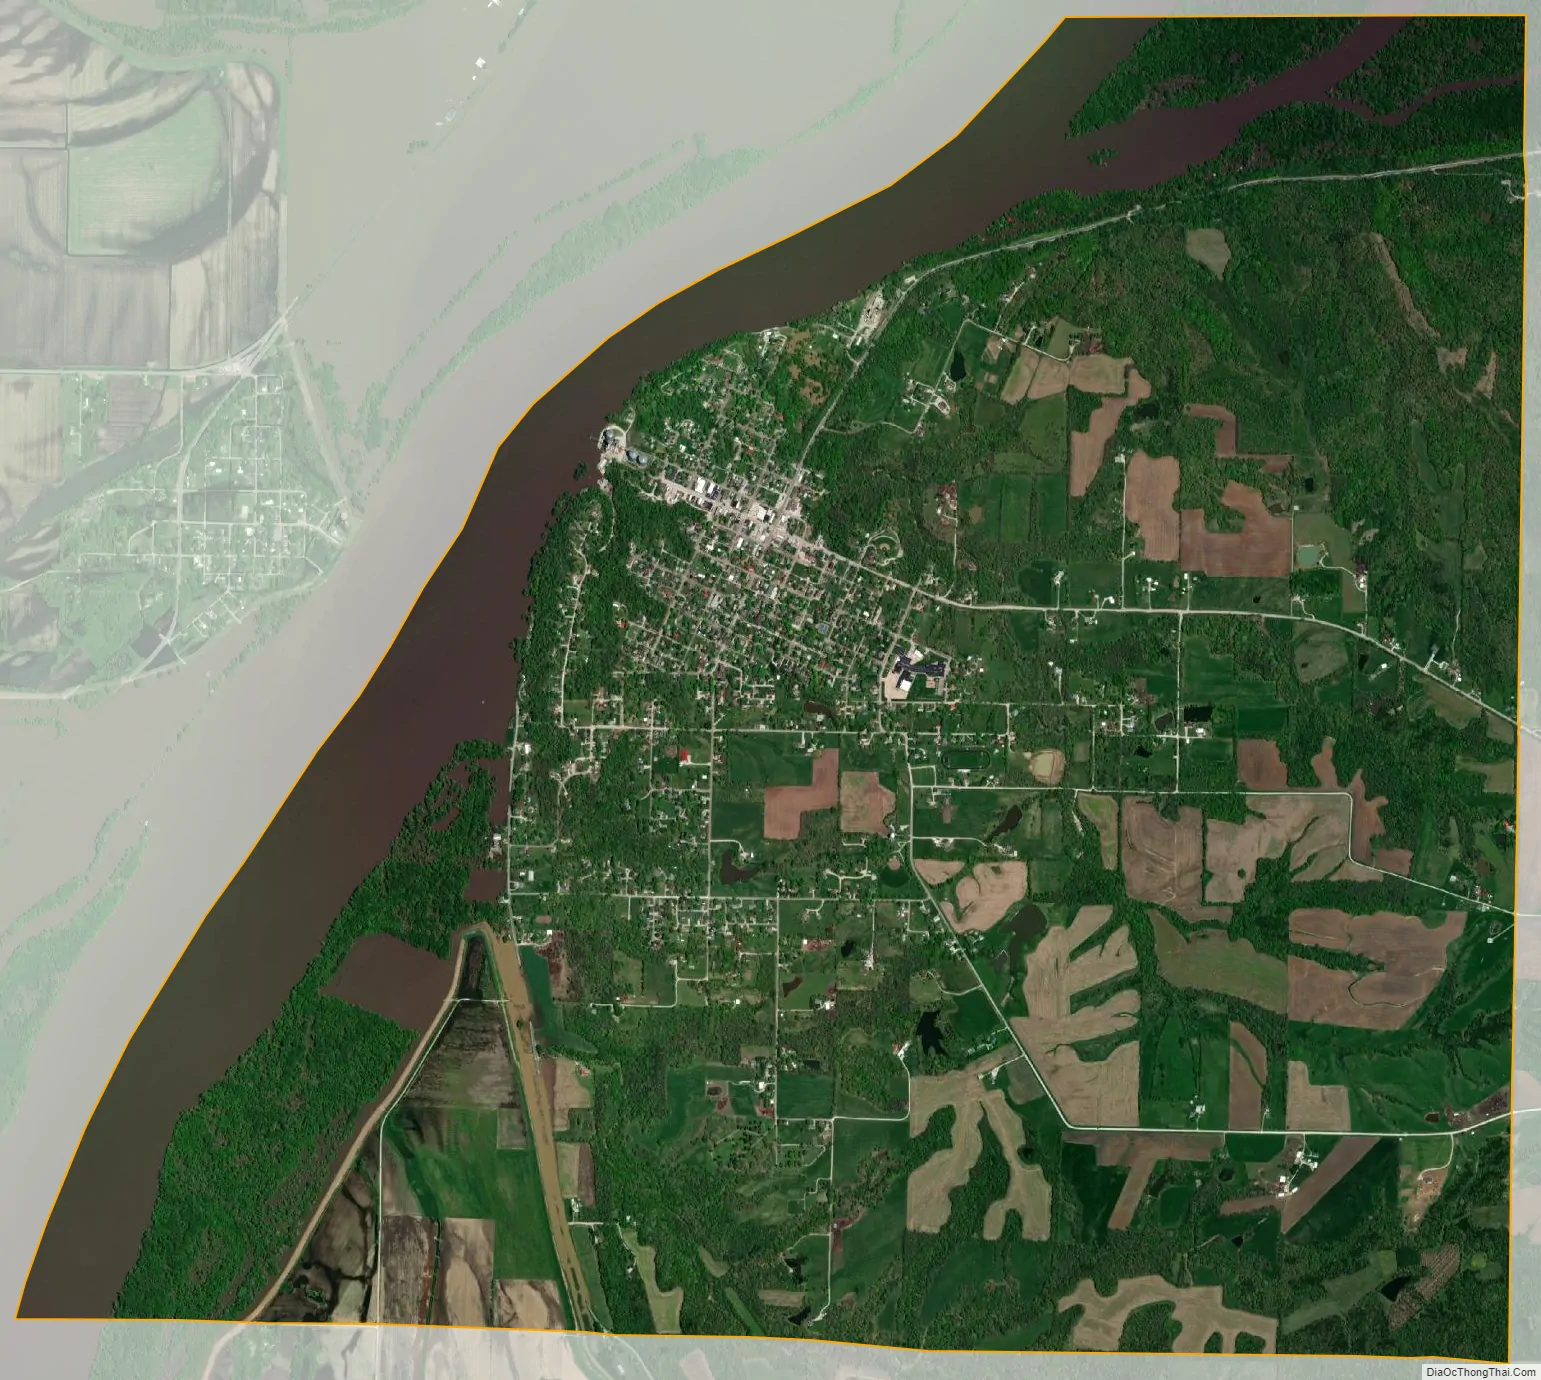 Map of Warsaw city, Illinois